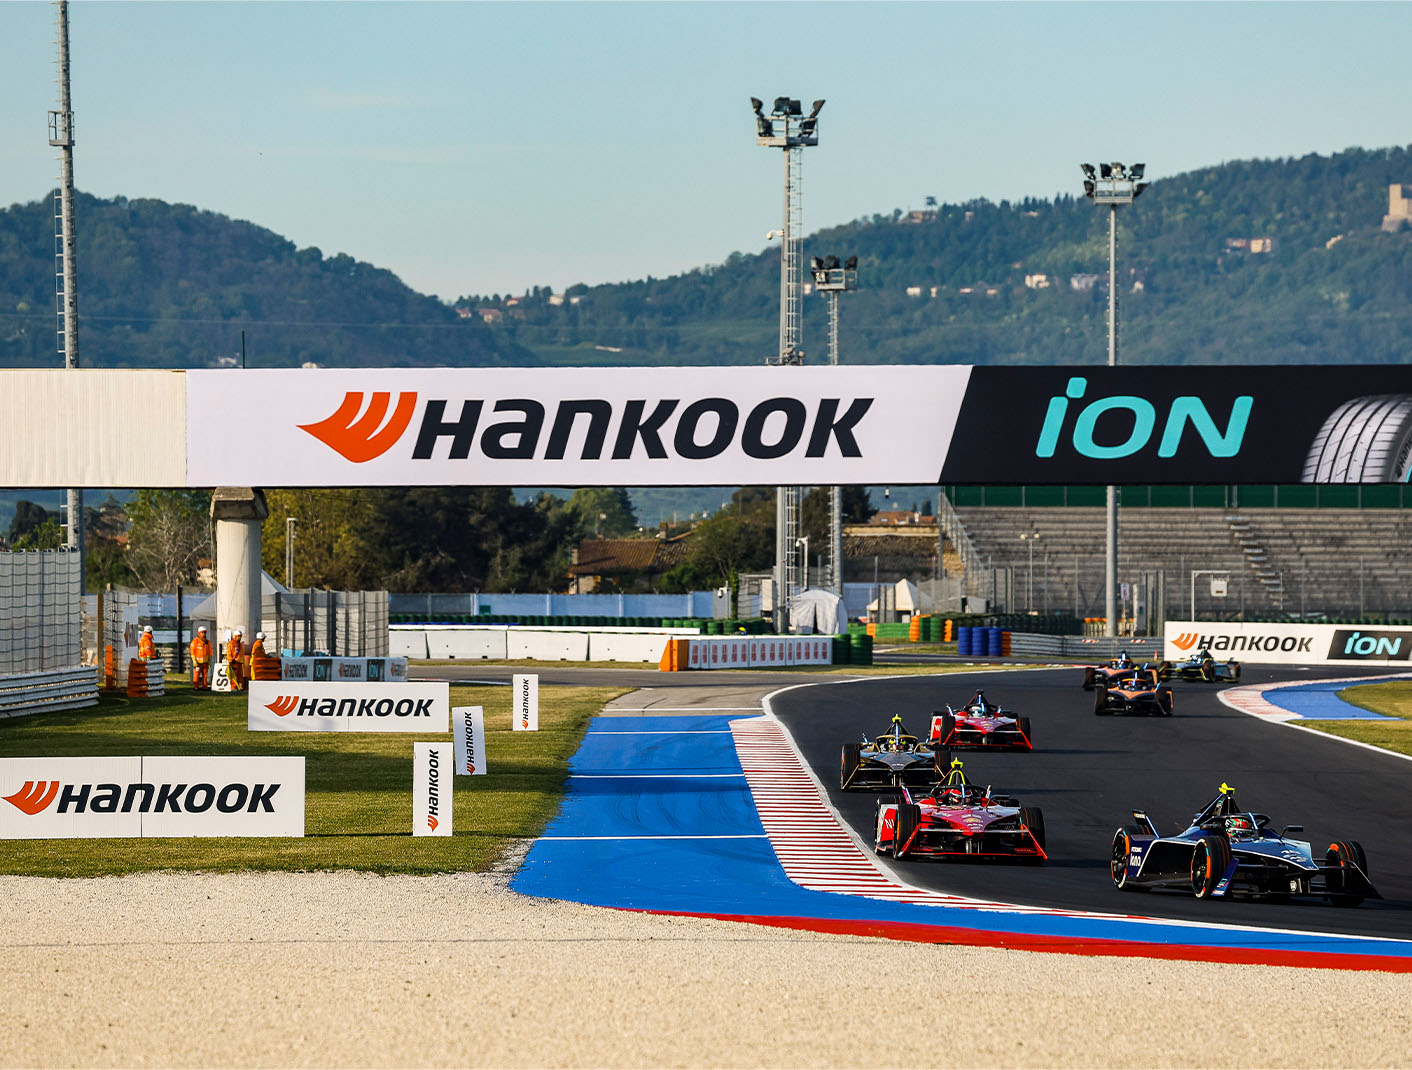 A princely outing: The Hankook iON Race heads to Monaco